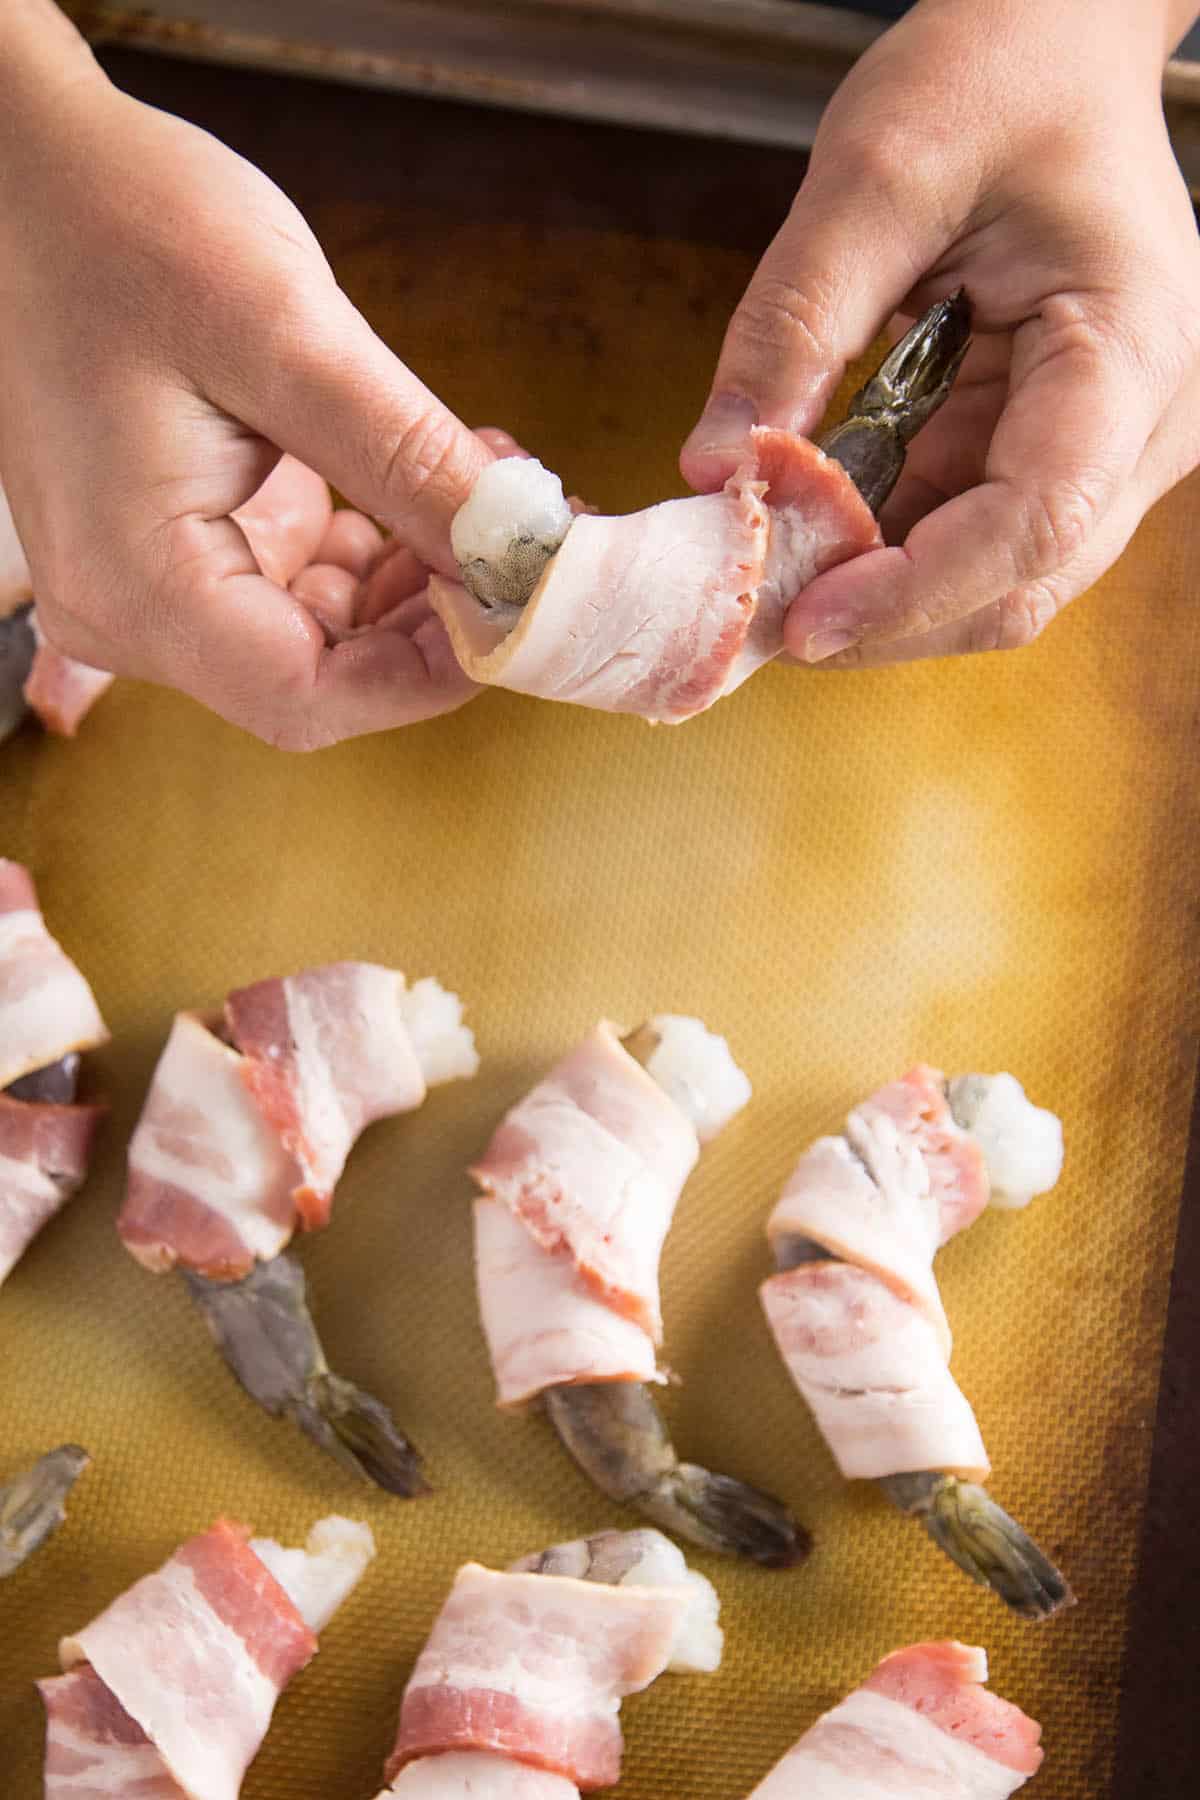 Wrapping the Shrimp in Bacon.